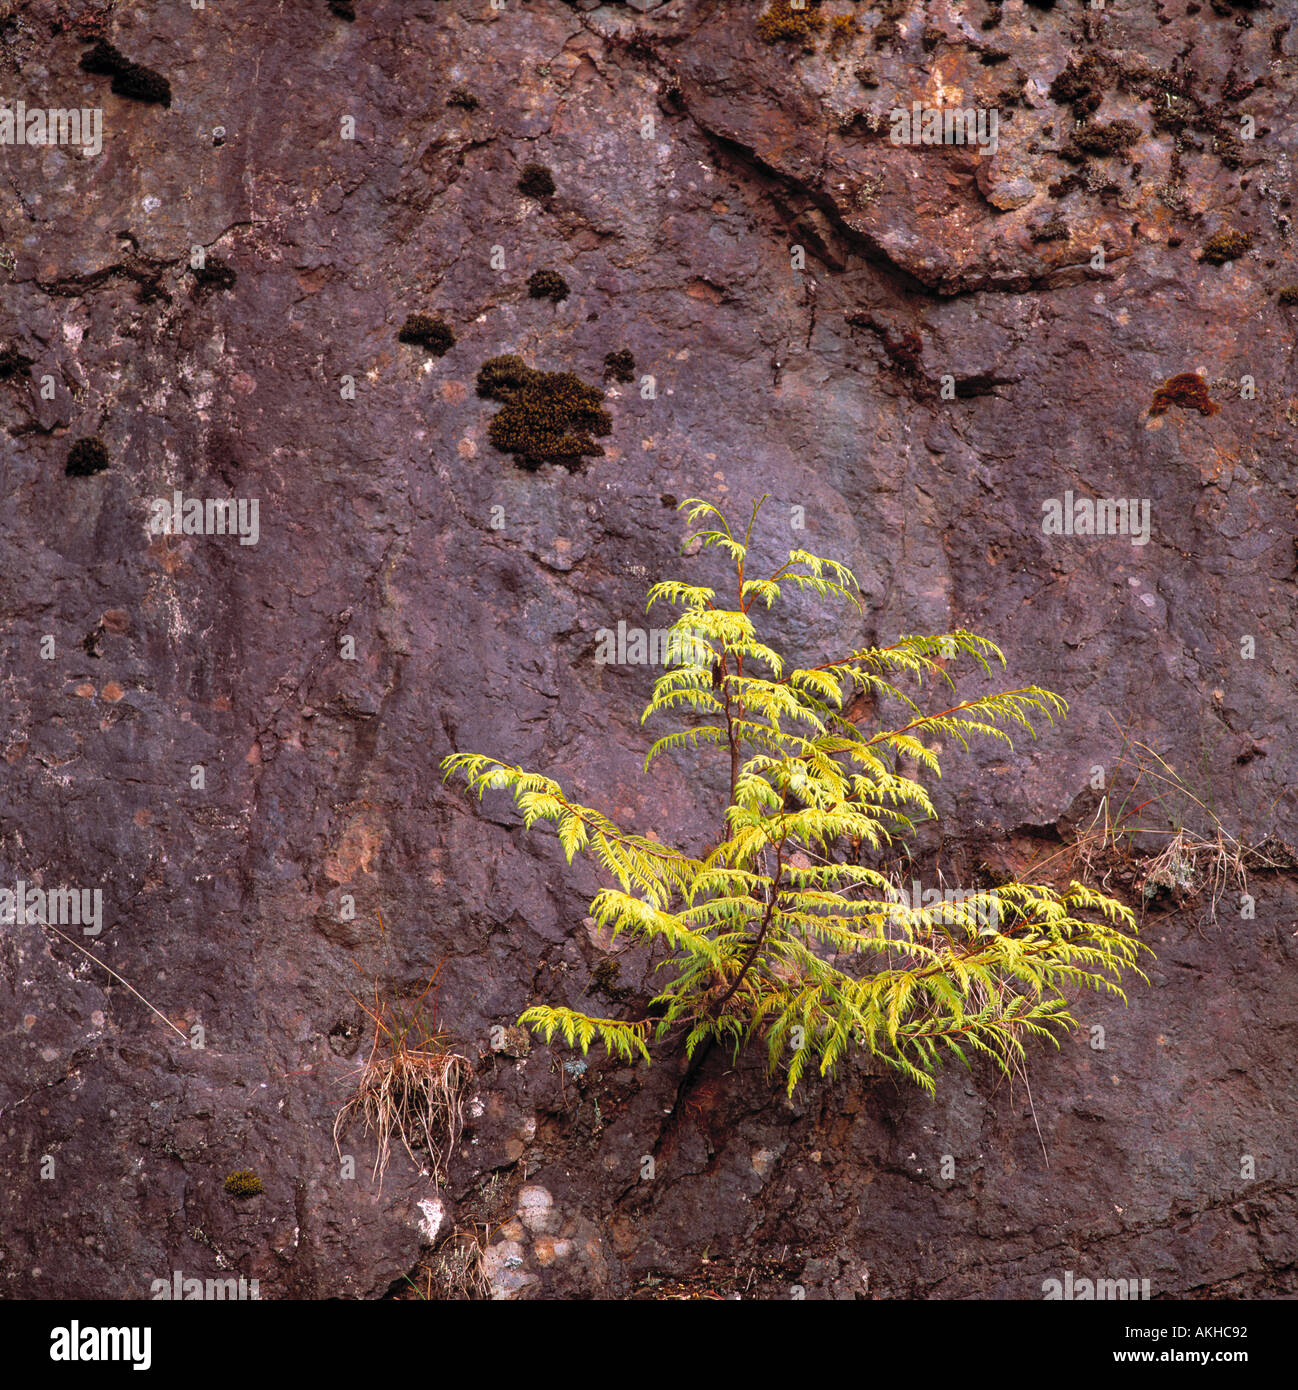 A Western Red Cedar or Thuja plicata Seedling grows out of a Rock Face along the Pacific West Coast of British Columbia Canada Stock Photo